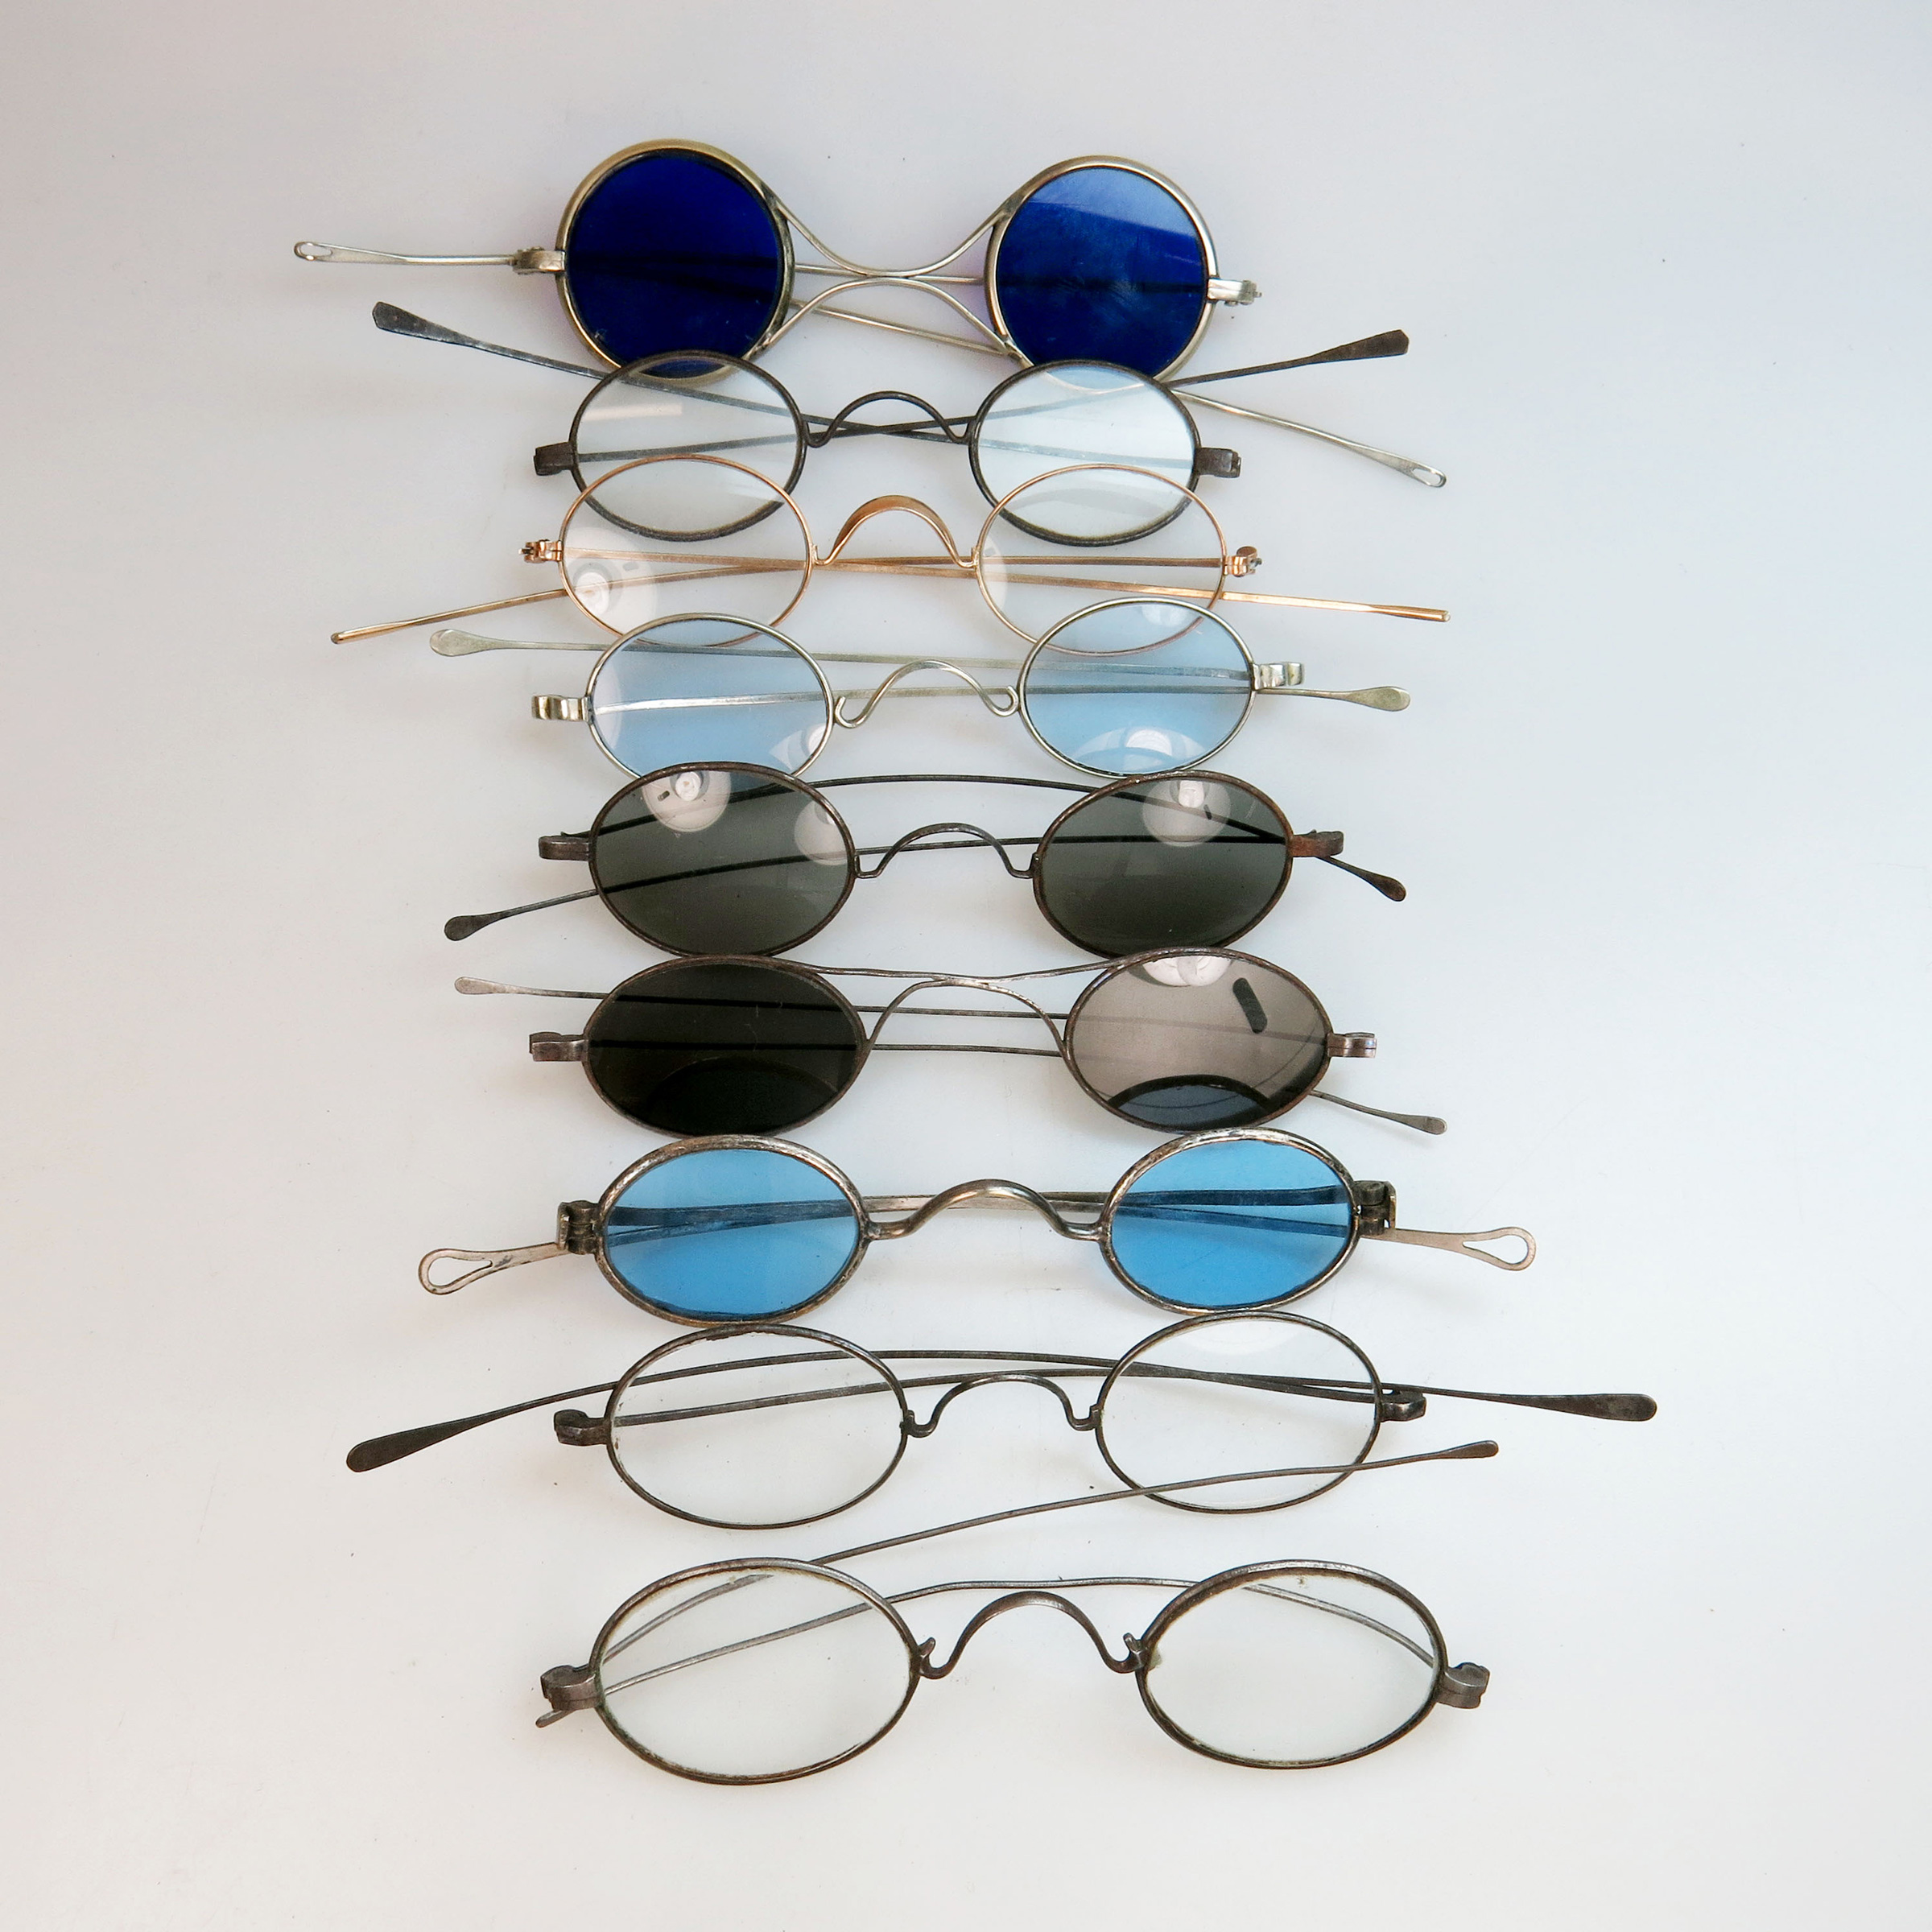 9 Pairs Of 19th Century Spectacles